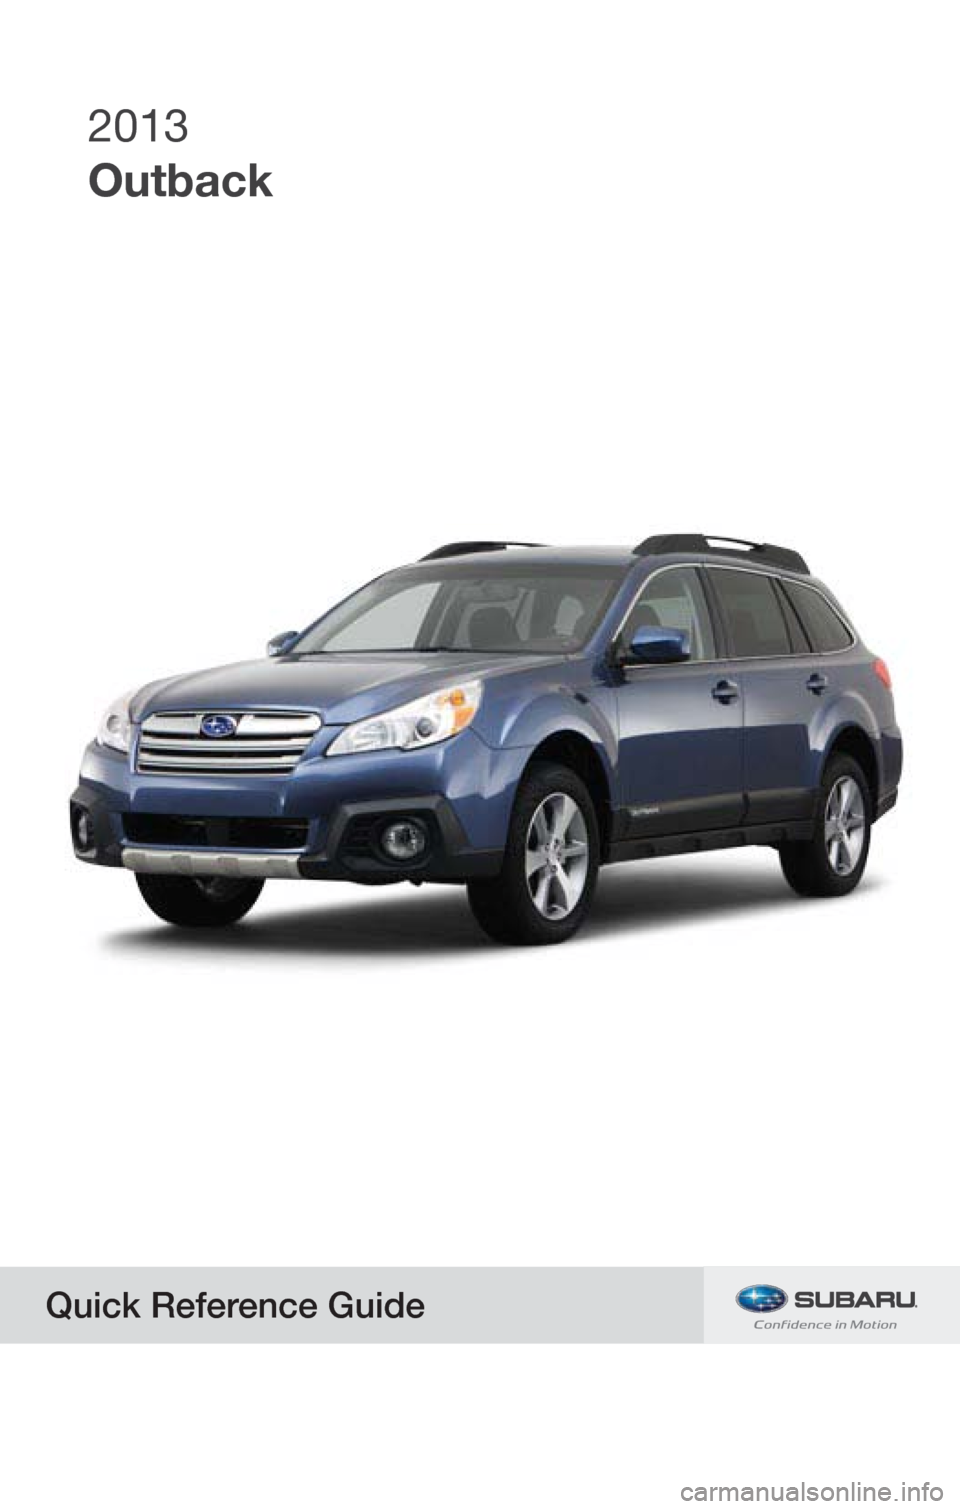 SUBARU OUTBACK 2013 5.G Quick Reference Guide 